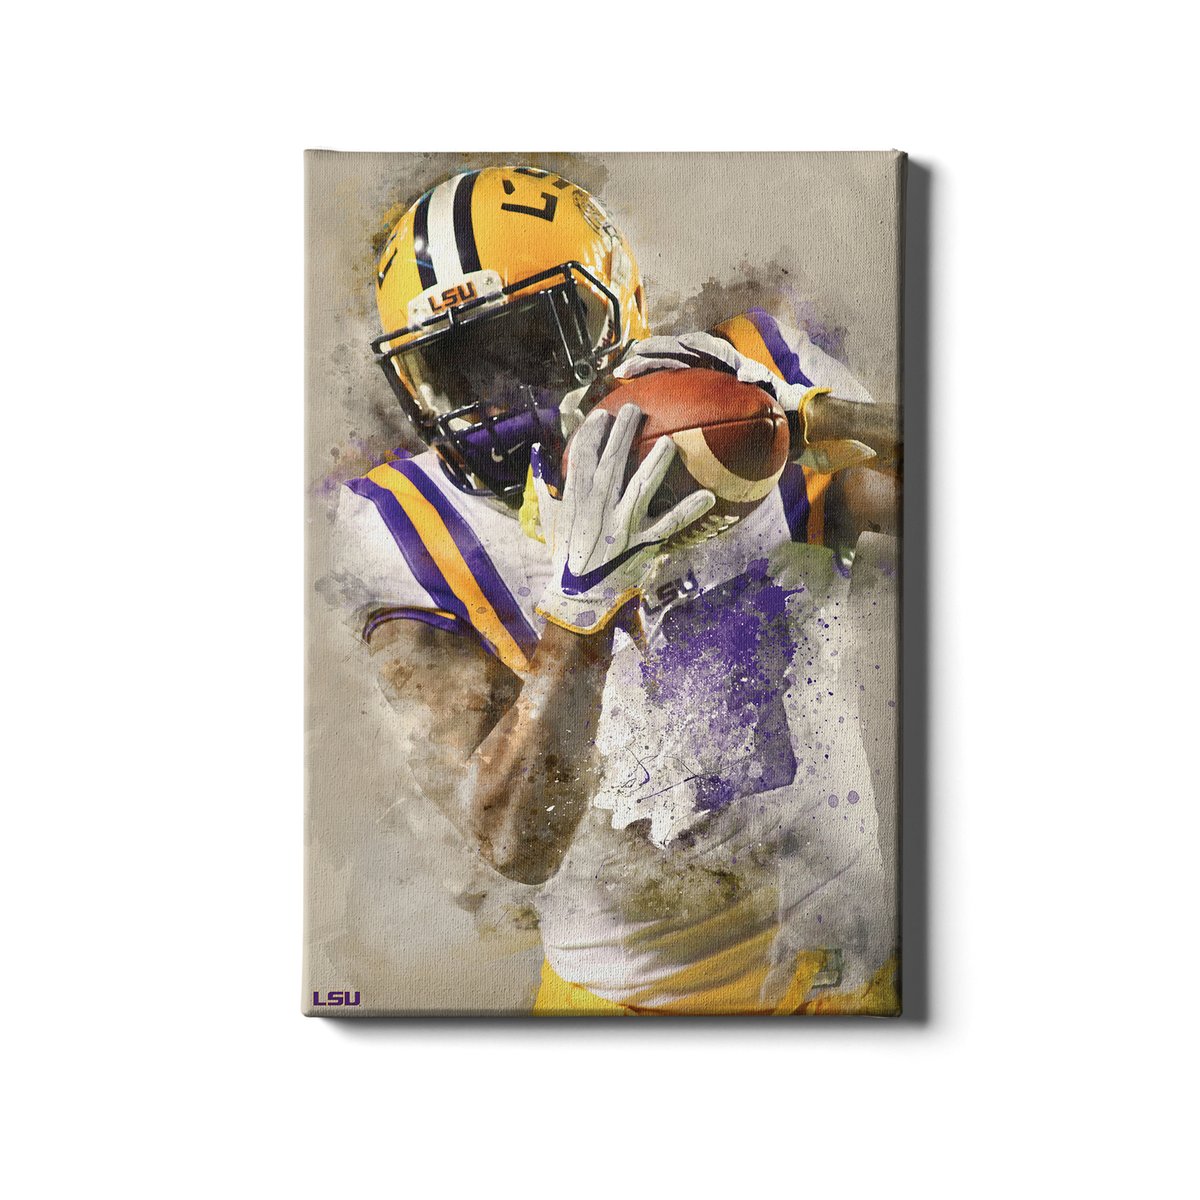 LSU Design in Watercolor. Not your typical football canvas. See more at collegewallart.com